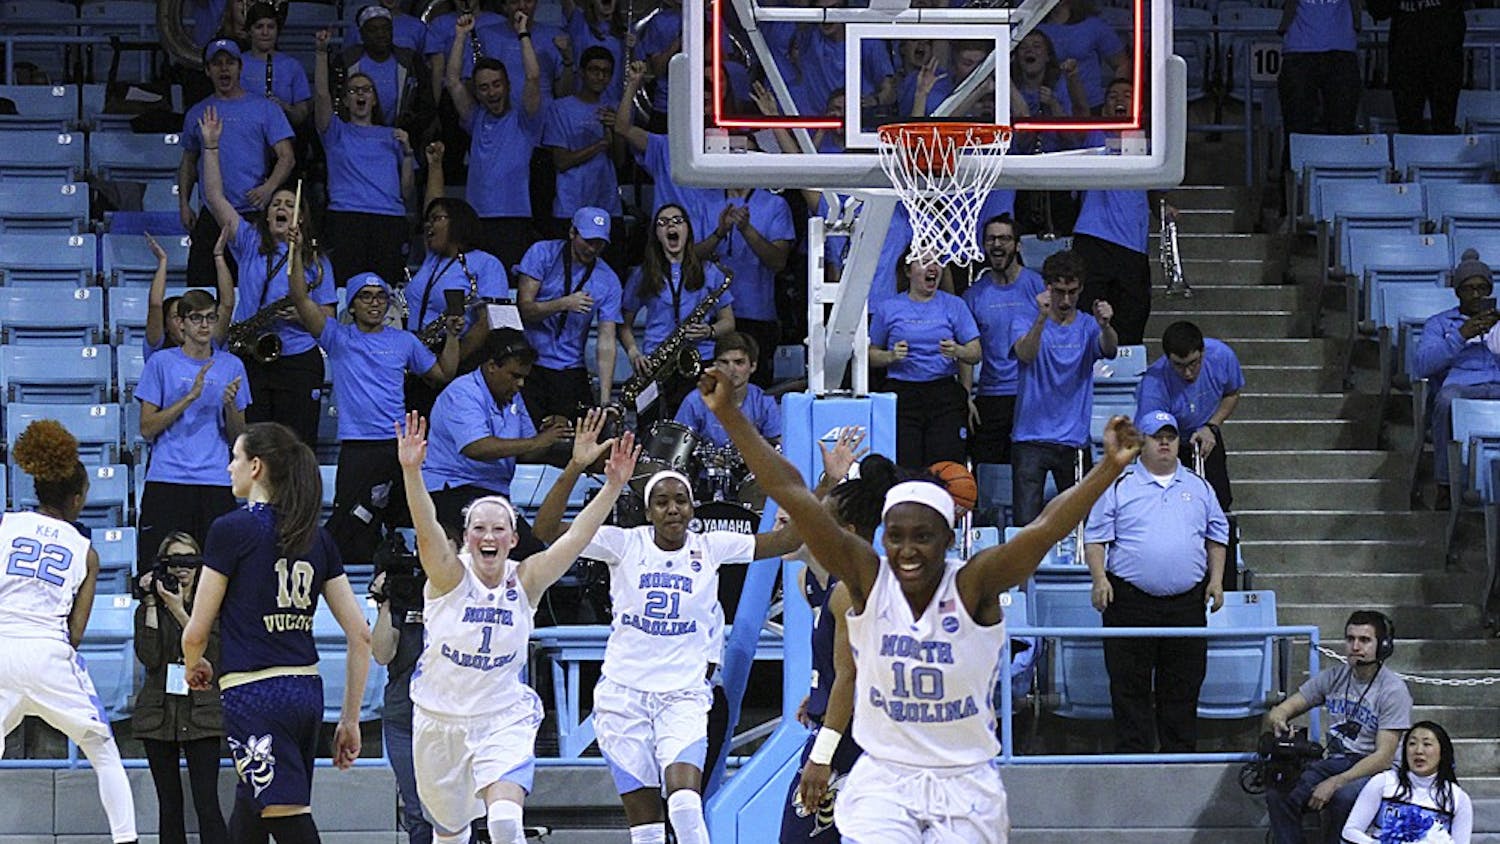 North Carolina guard Jamie Cherry (10) celebrates after the final buzzer on Thursday. Cherry hit a 3-pointer with two seconds left to life the Tar Heels over Georgia Tech.